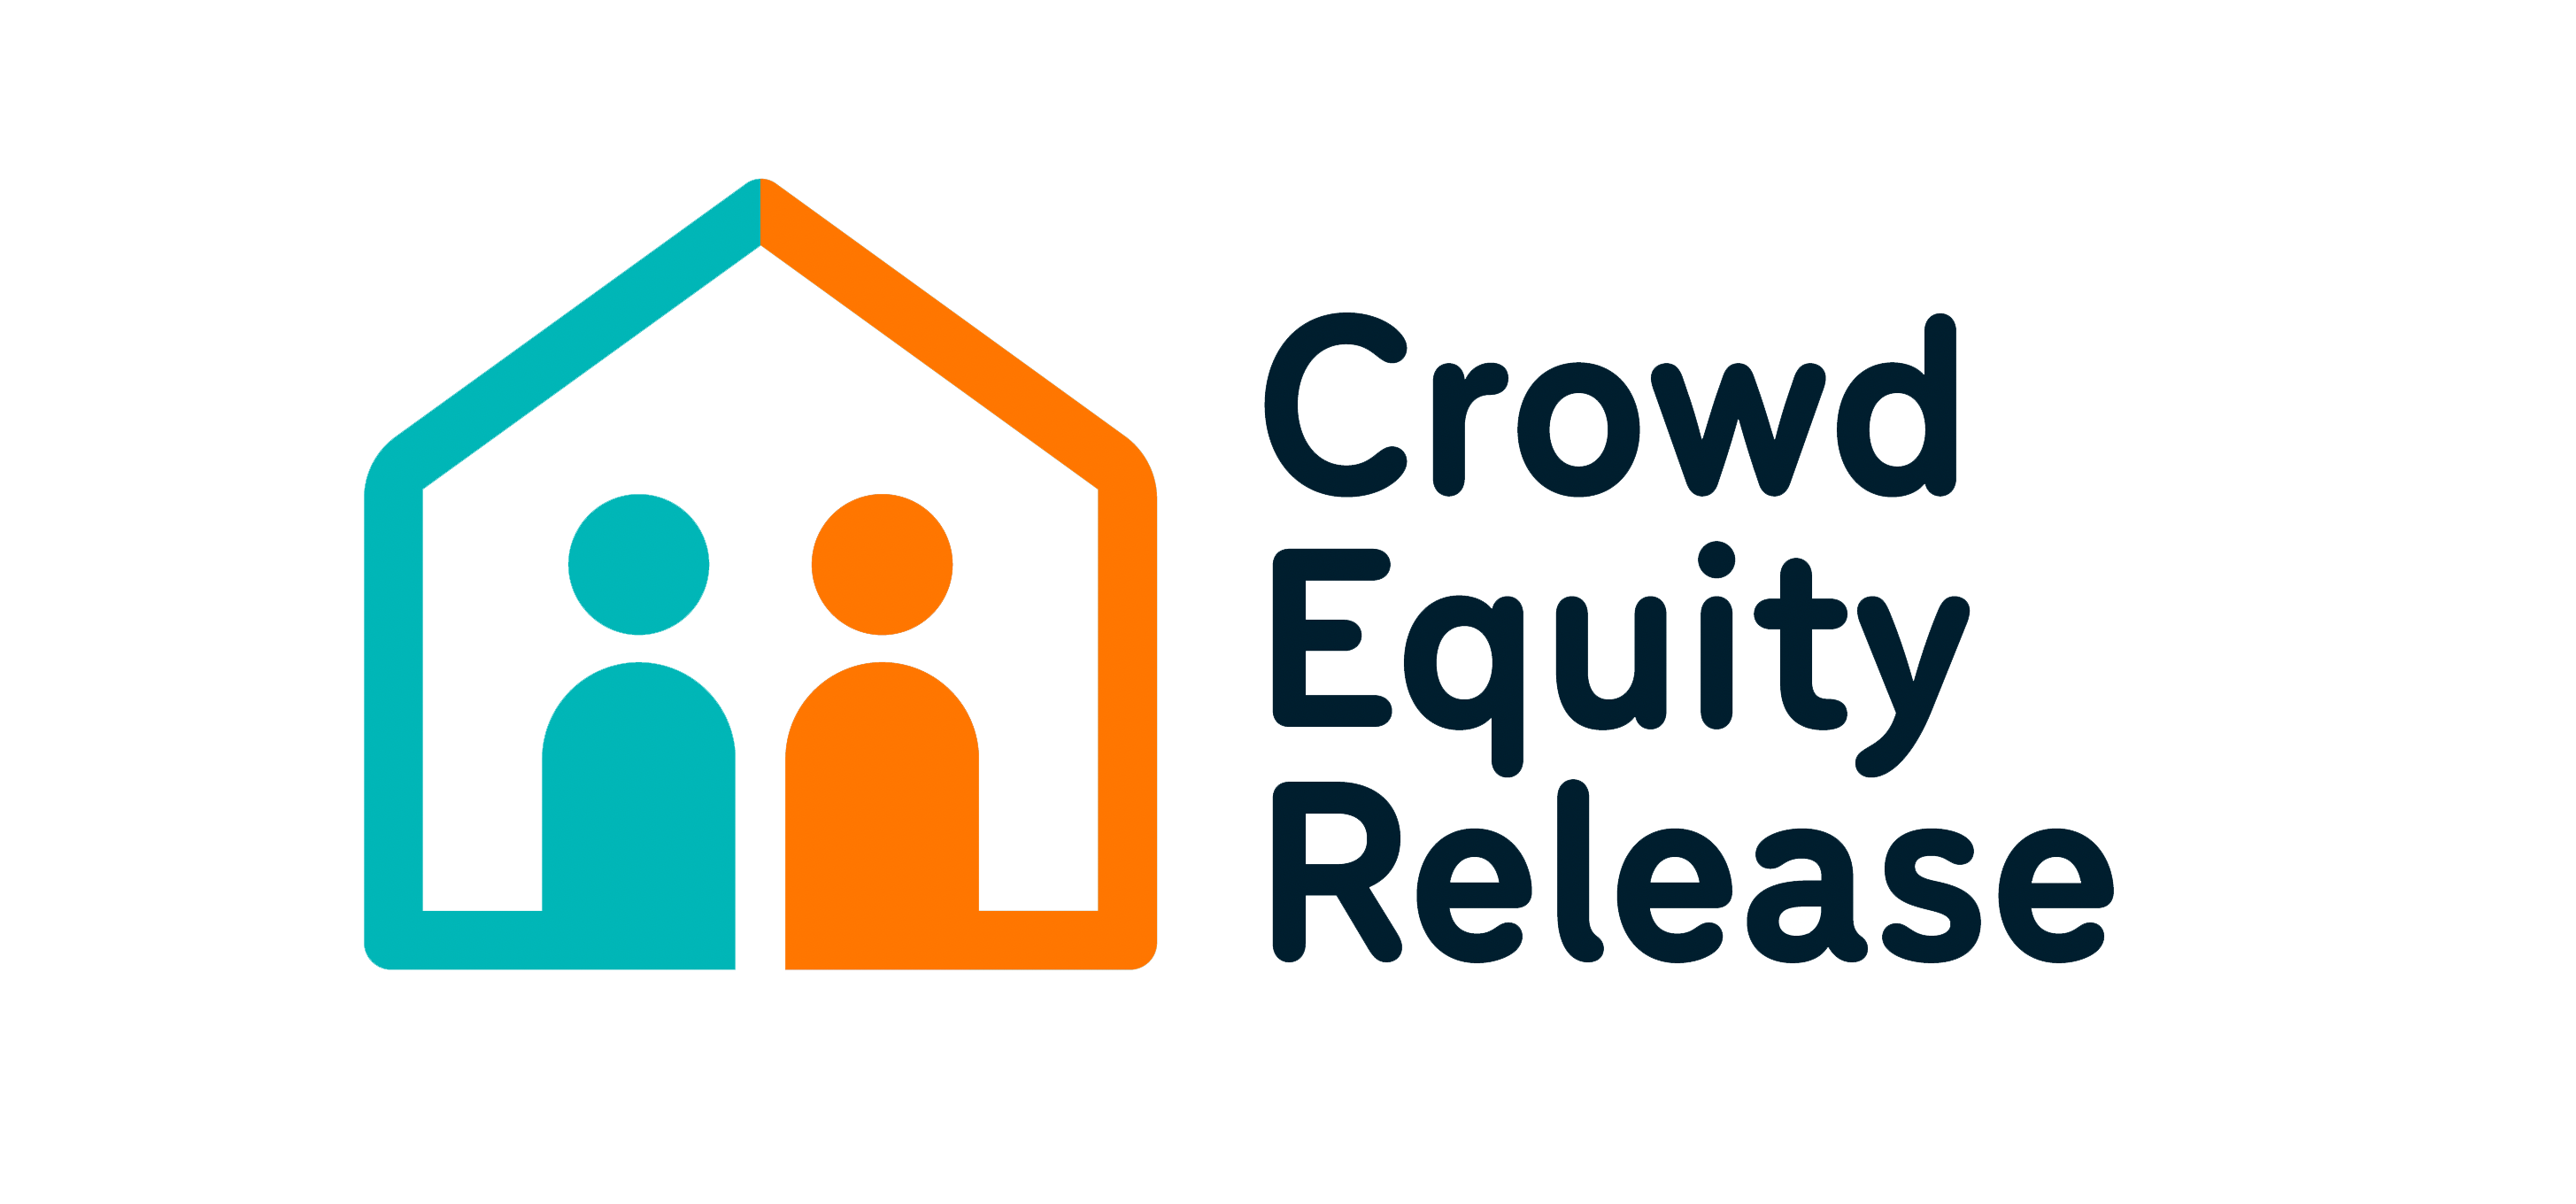 Crowd Equity Release logo